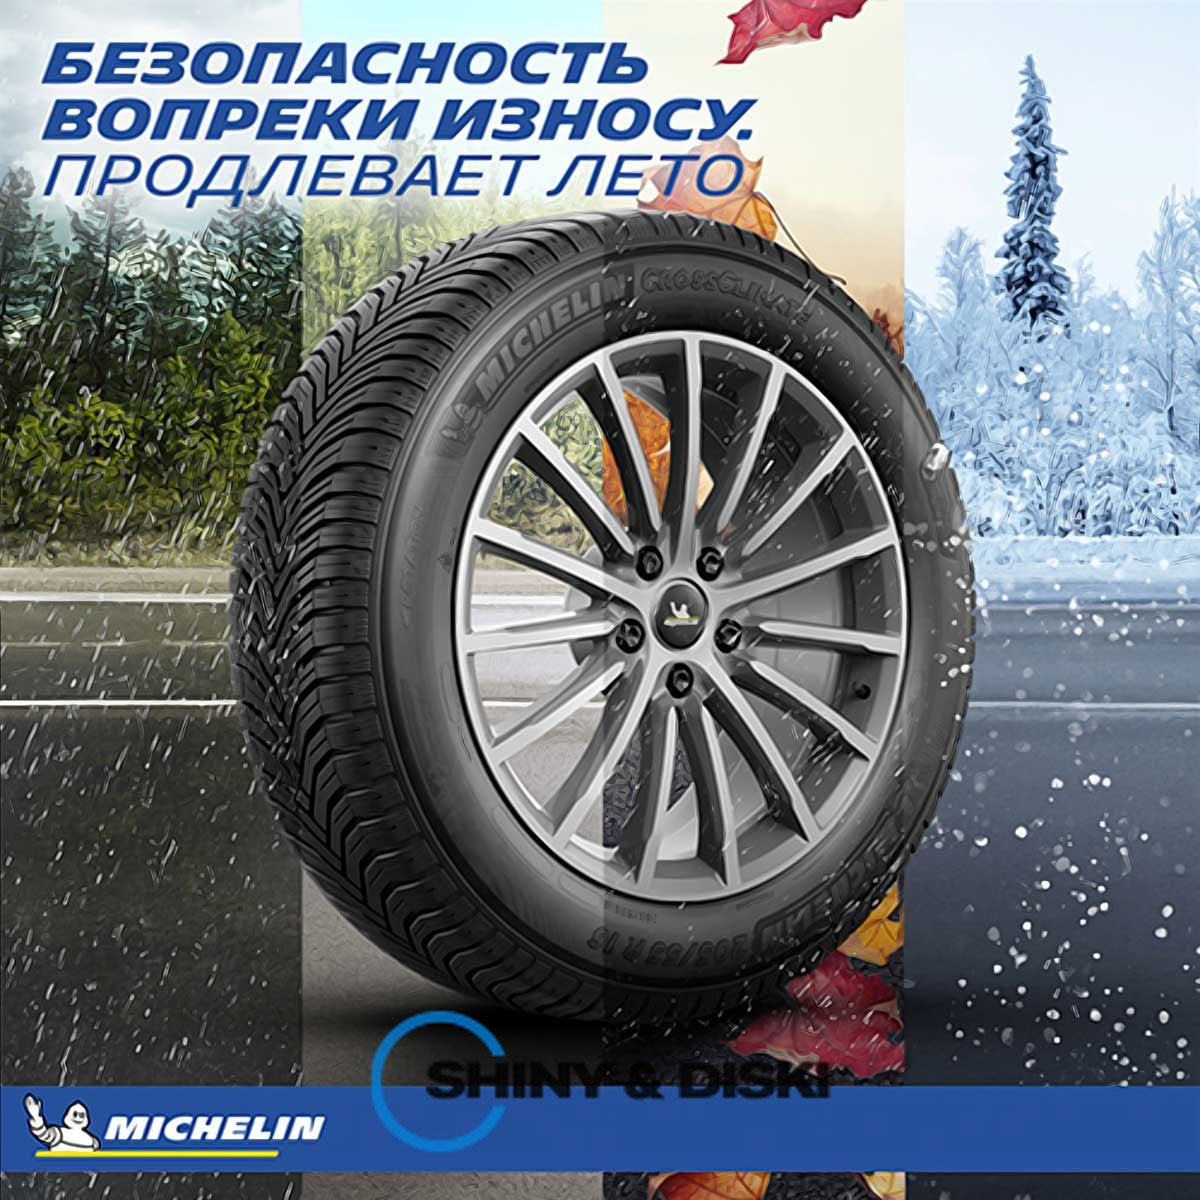 покрышки michelin cross climate+ 215/55 r17 98w